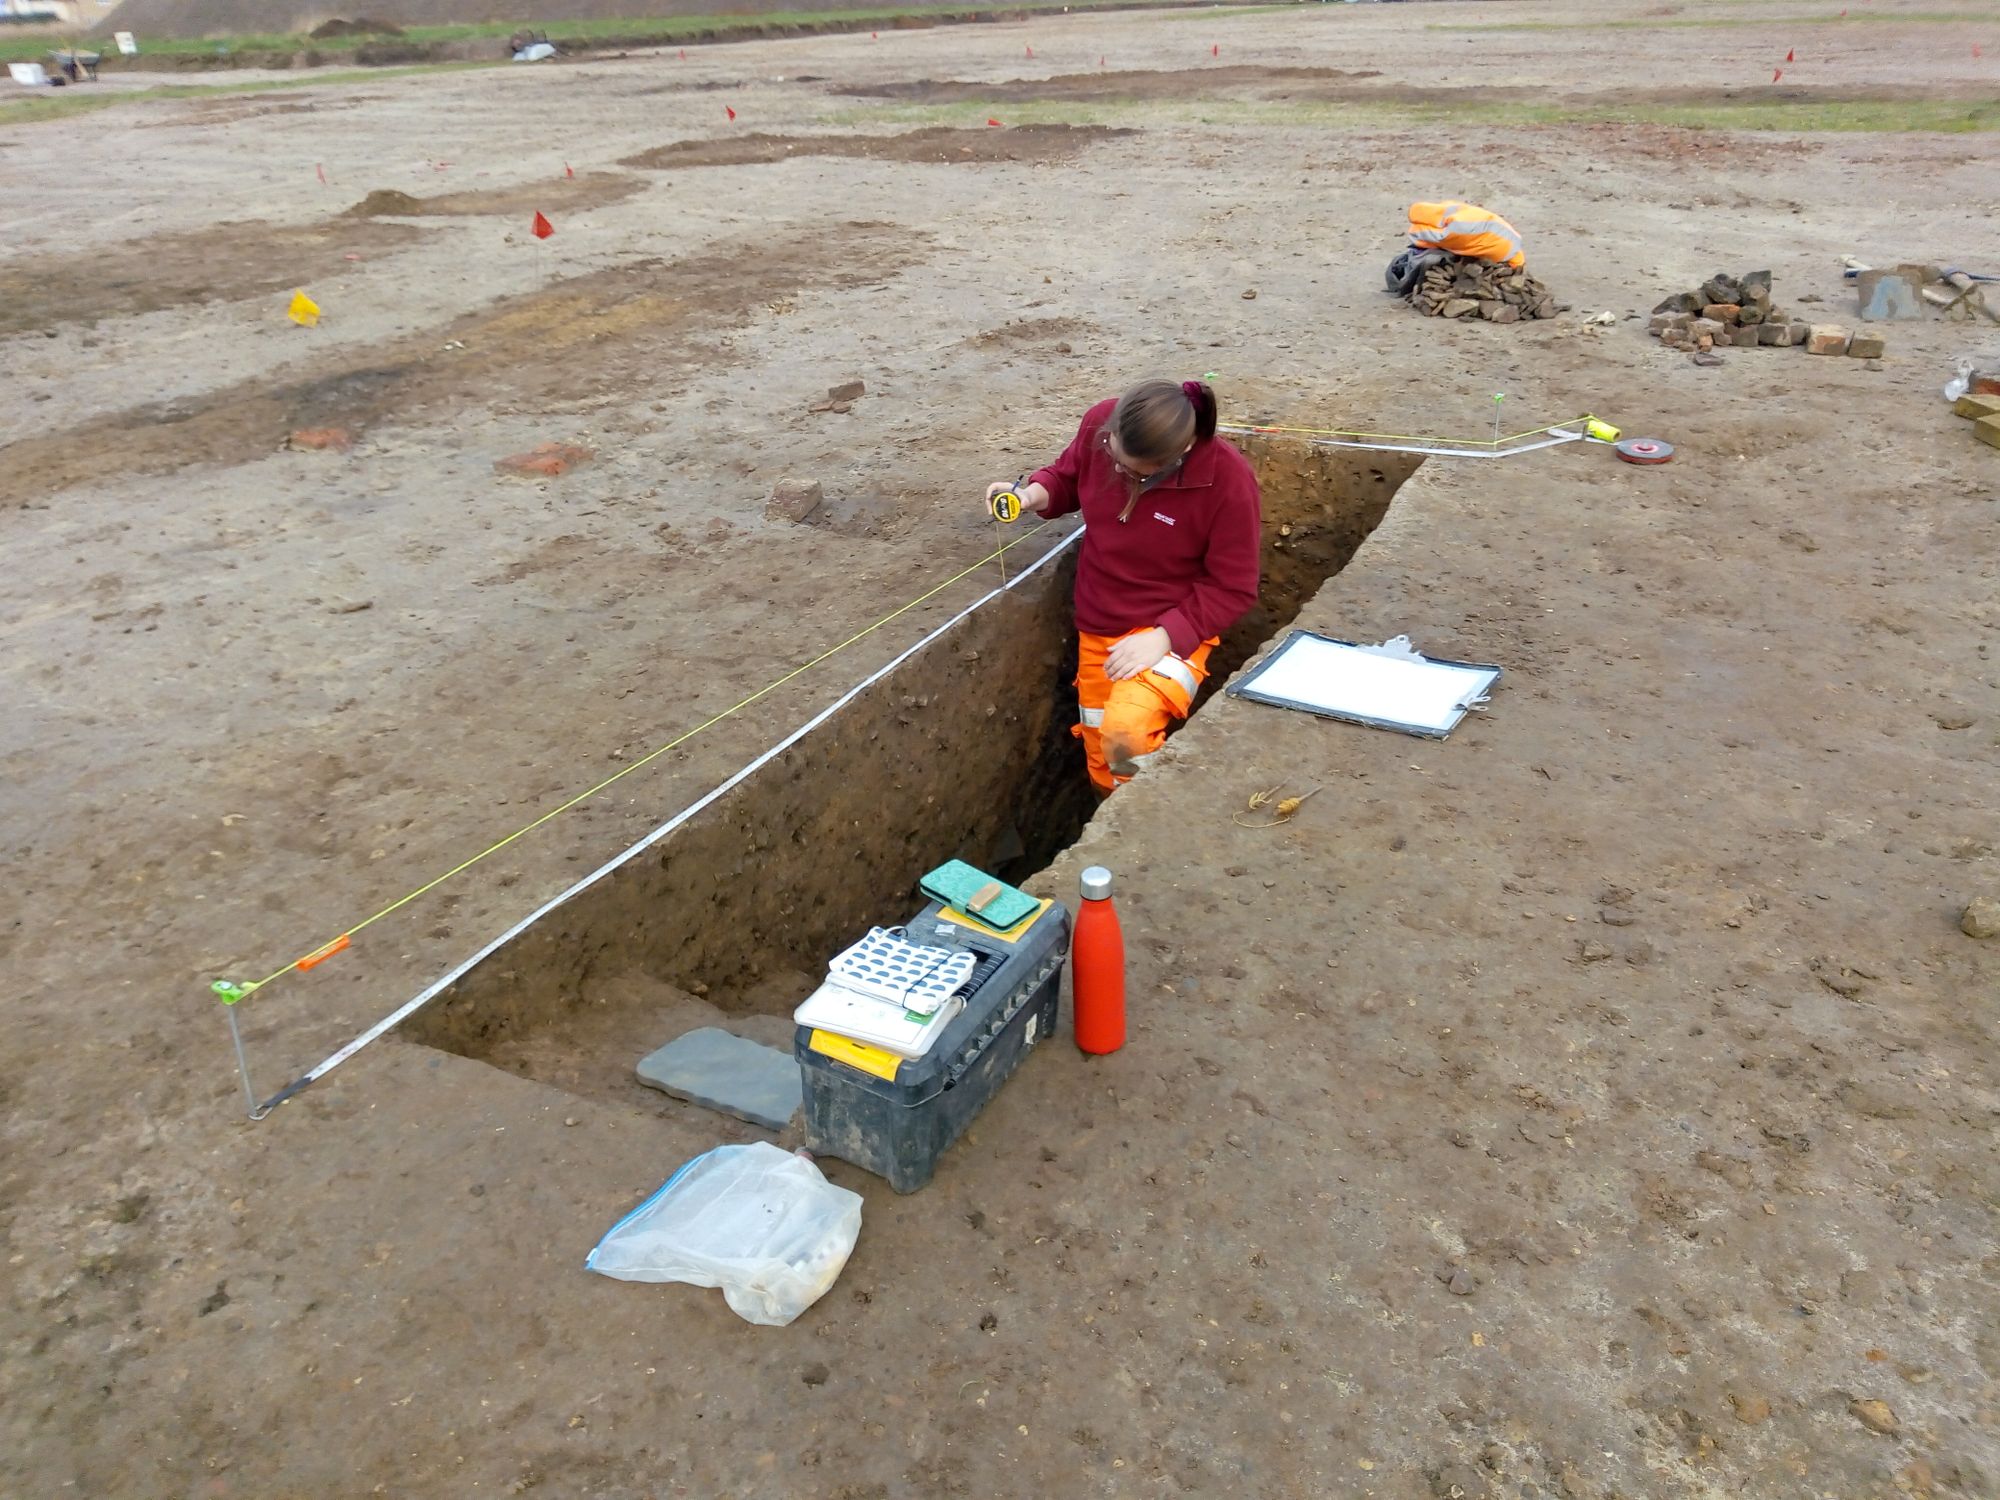 An archaeologist holds a measuring tape to record the section of a narrow dug slot.